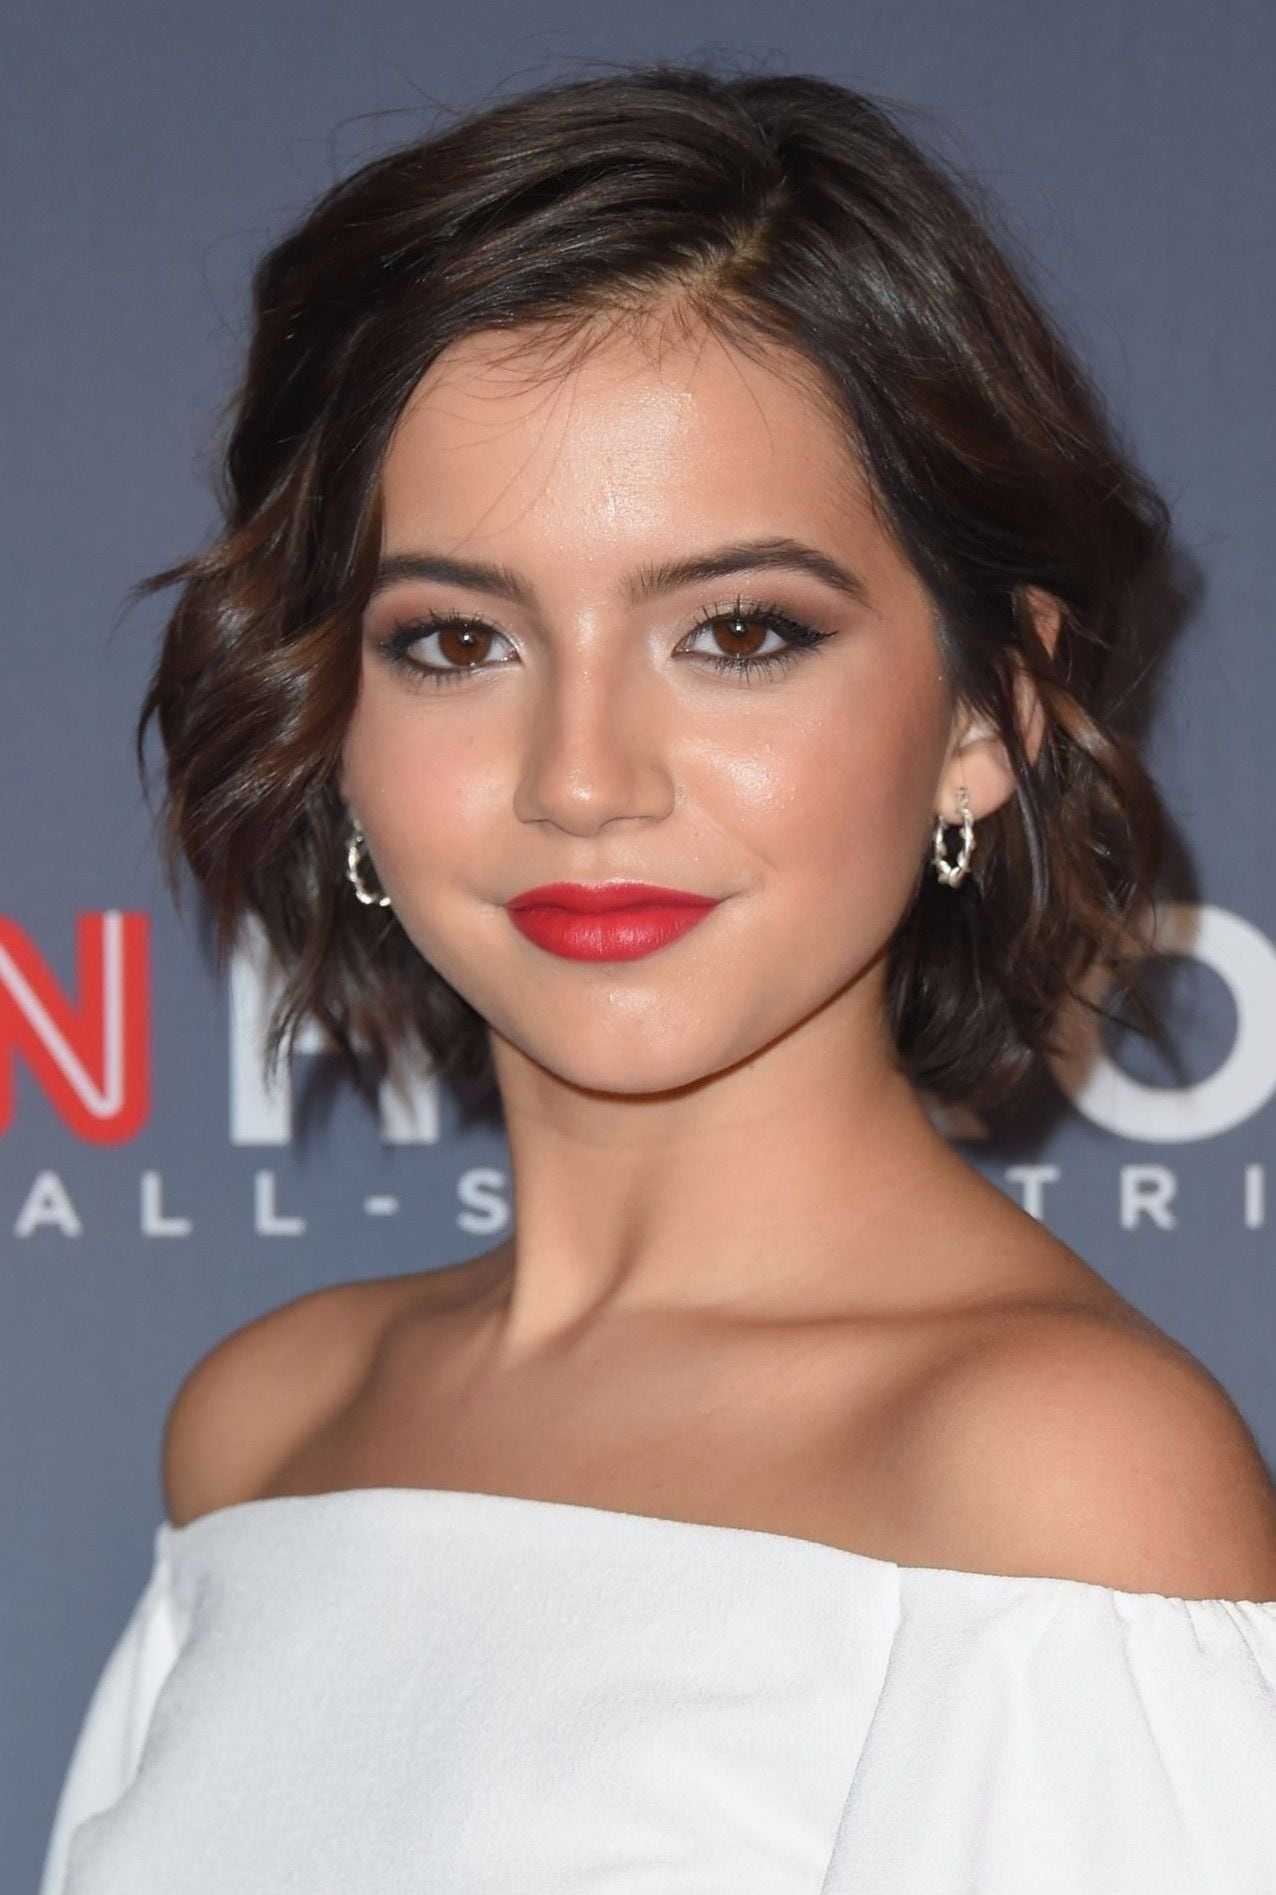 70+ Hot Pictures Of Isabela Moner Which Will Rock Your World 121